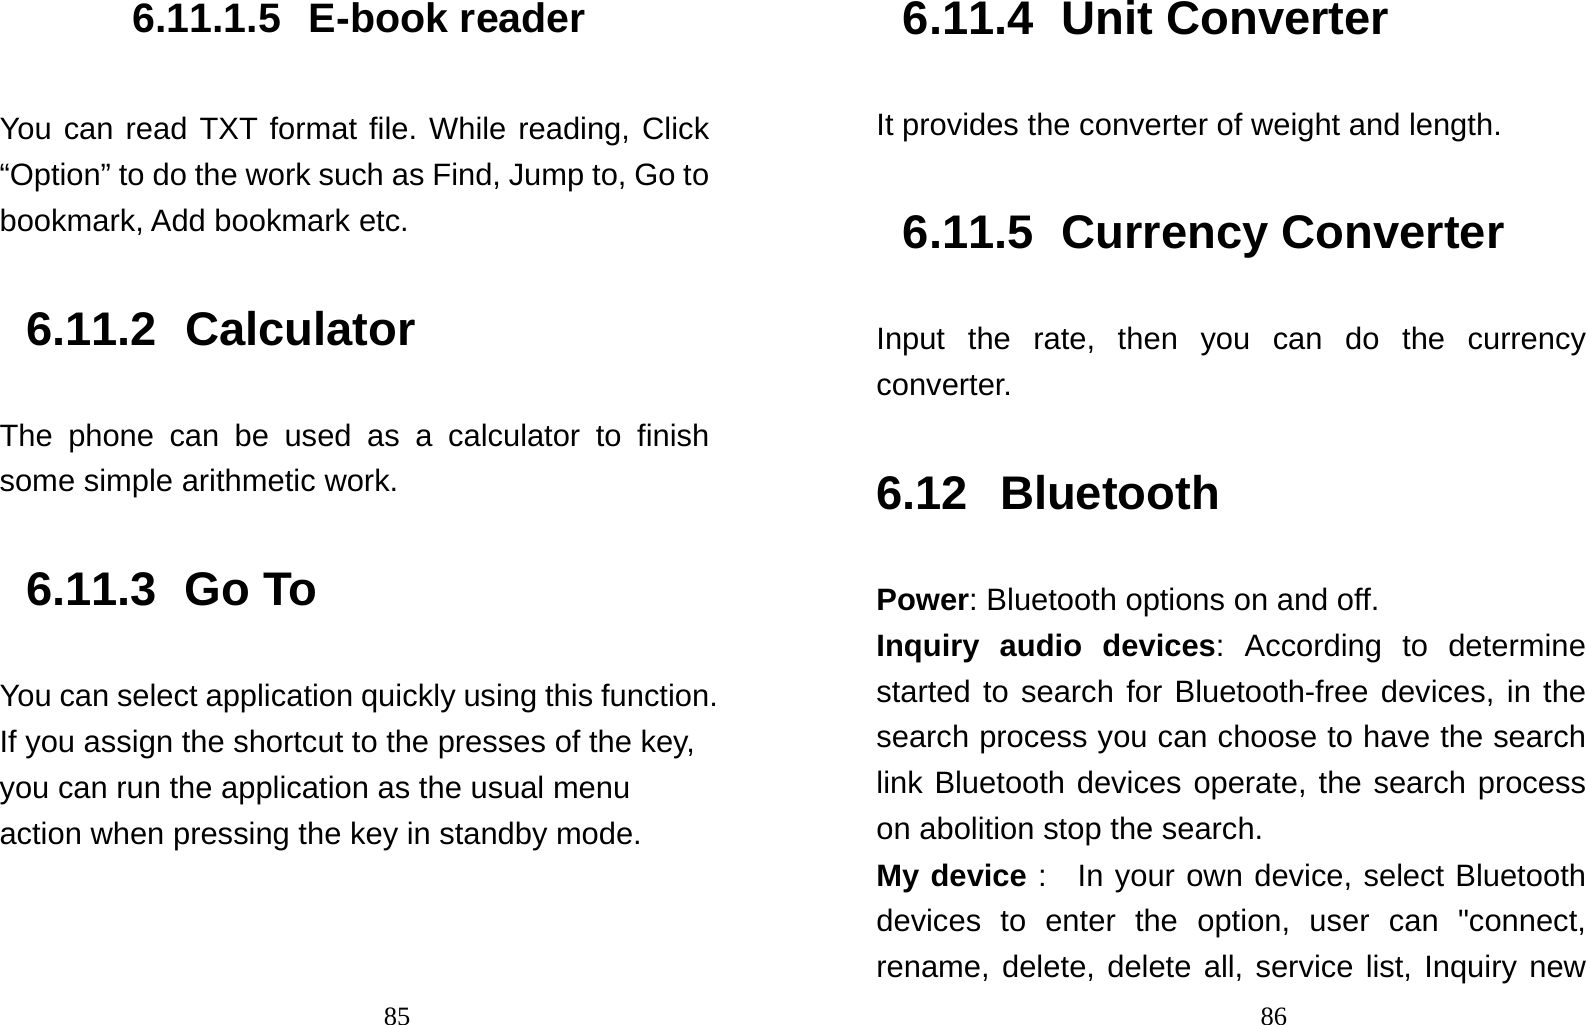                                856.11.1.5 E-book reader You can read TXT format file. While reading, Click “Option” to do the work such as Find, Jump to, Go to bookmark, Add bookmark etc. 6.11.2 Calculator The phone can be used as a calculator to finish some simple arithmetic work. 6.11.3 Go To You can select application quickly using this function. If you assign the shortcut to the presses of the key, you can run the application as the usual menu action when pressing the key in standby mode.                                  866.11.4 Unit Converter It provides the converter of weight and length. 6.11.5 Currency Converter Input the rate, then you can do the currency converter.  6.12 Bluetooth Power: Bluetooth options on and off.   Inquiry audio devices: According to determine started to search for Bluetooth-free devices, in the search process you can choose to have the search link Bluetooth devices operate, the search process on abolition stop the search.   My device :  In your own device, select Bluetooth devices to enter the option, user can &quot;connect, rename, delete, delete all, service list, Inquiry new 